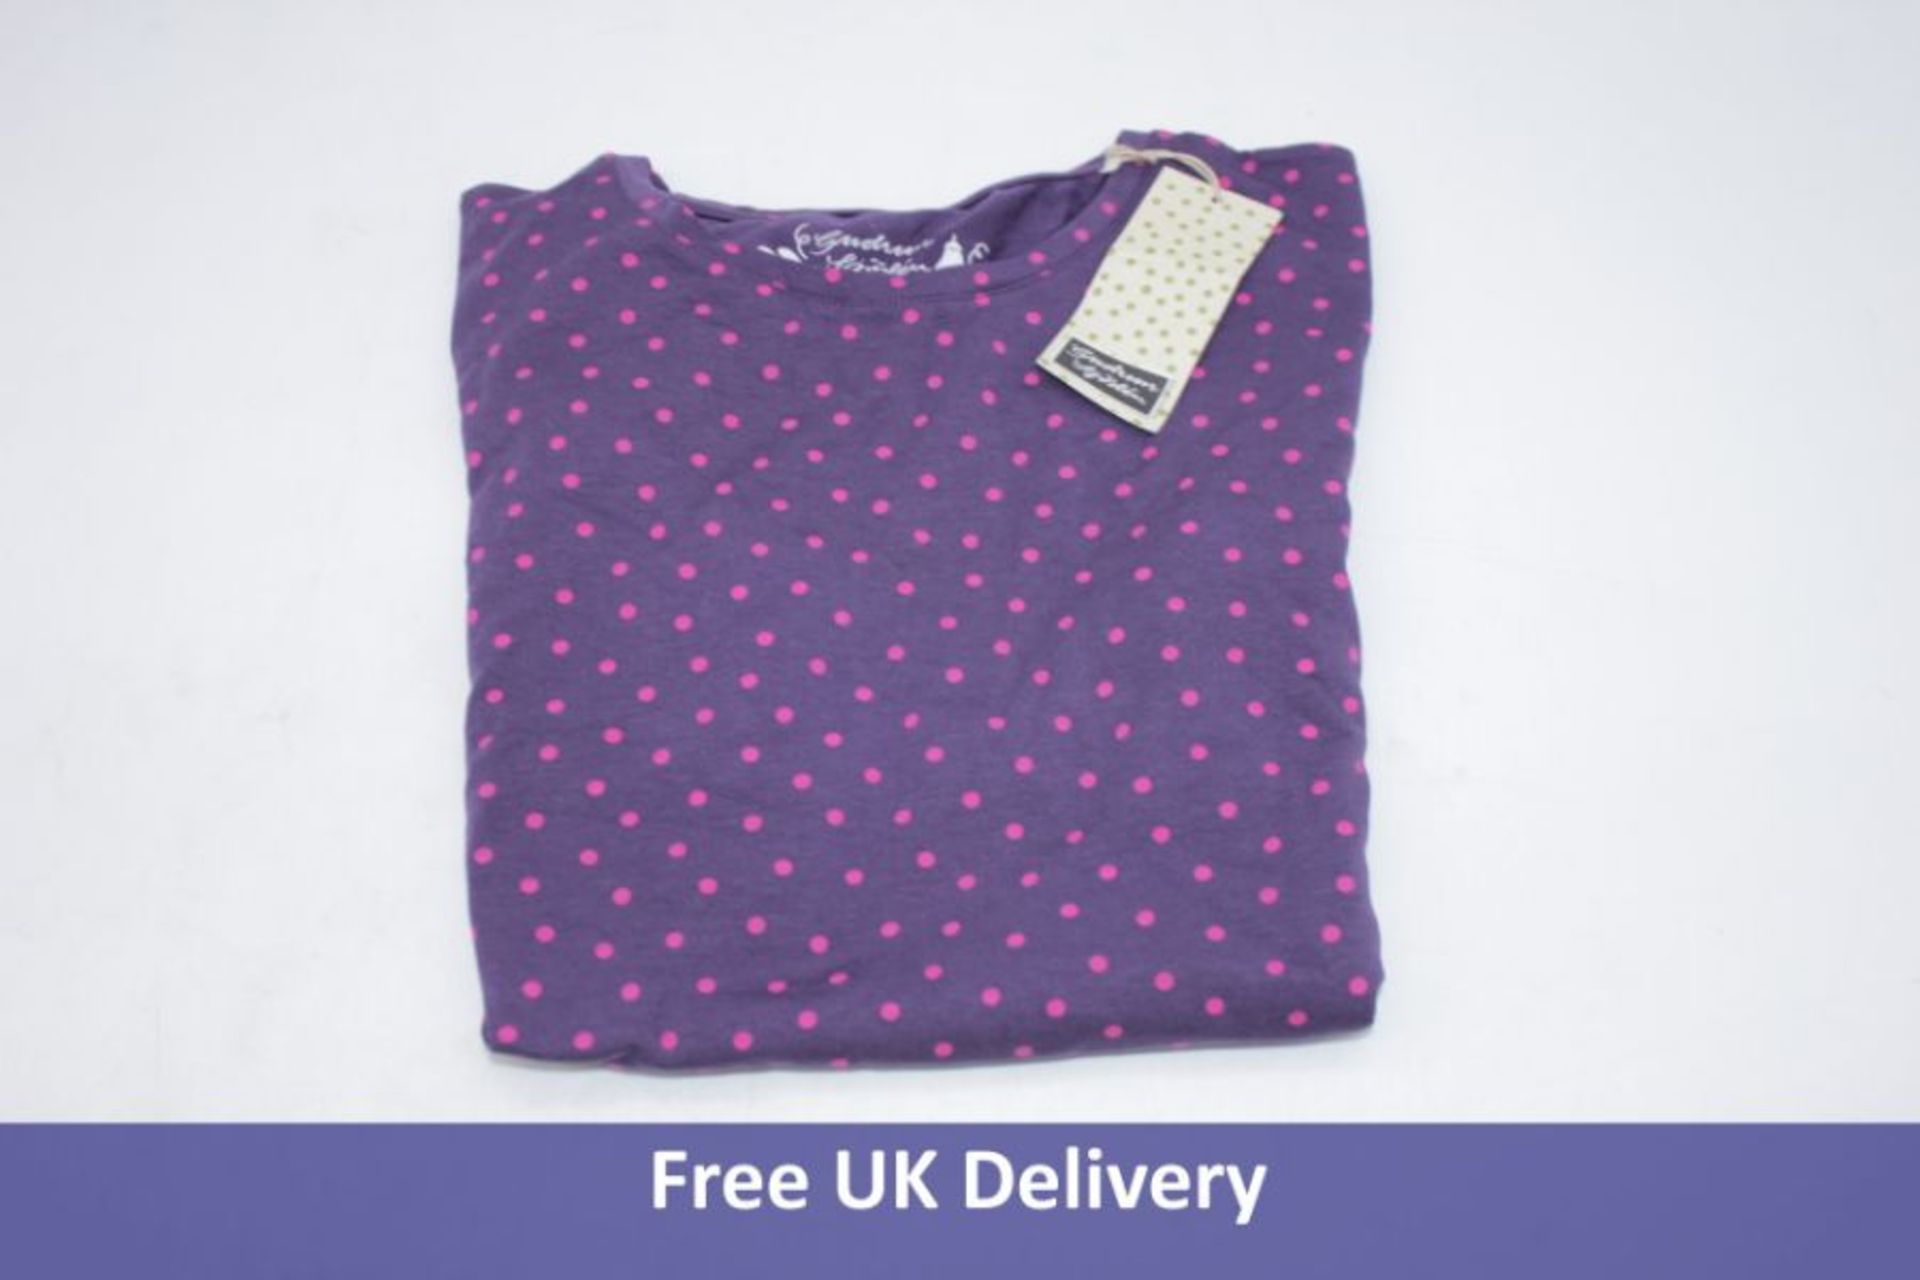 Two items of Gudrun Sjoden Women's Clothing to include 1x Pytte Top, Purple Spots, M and 1x Hello Le